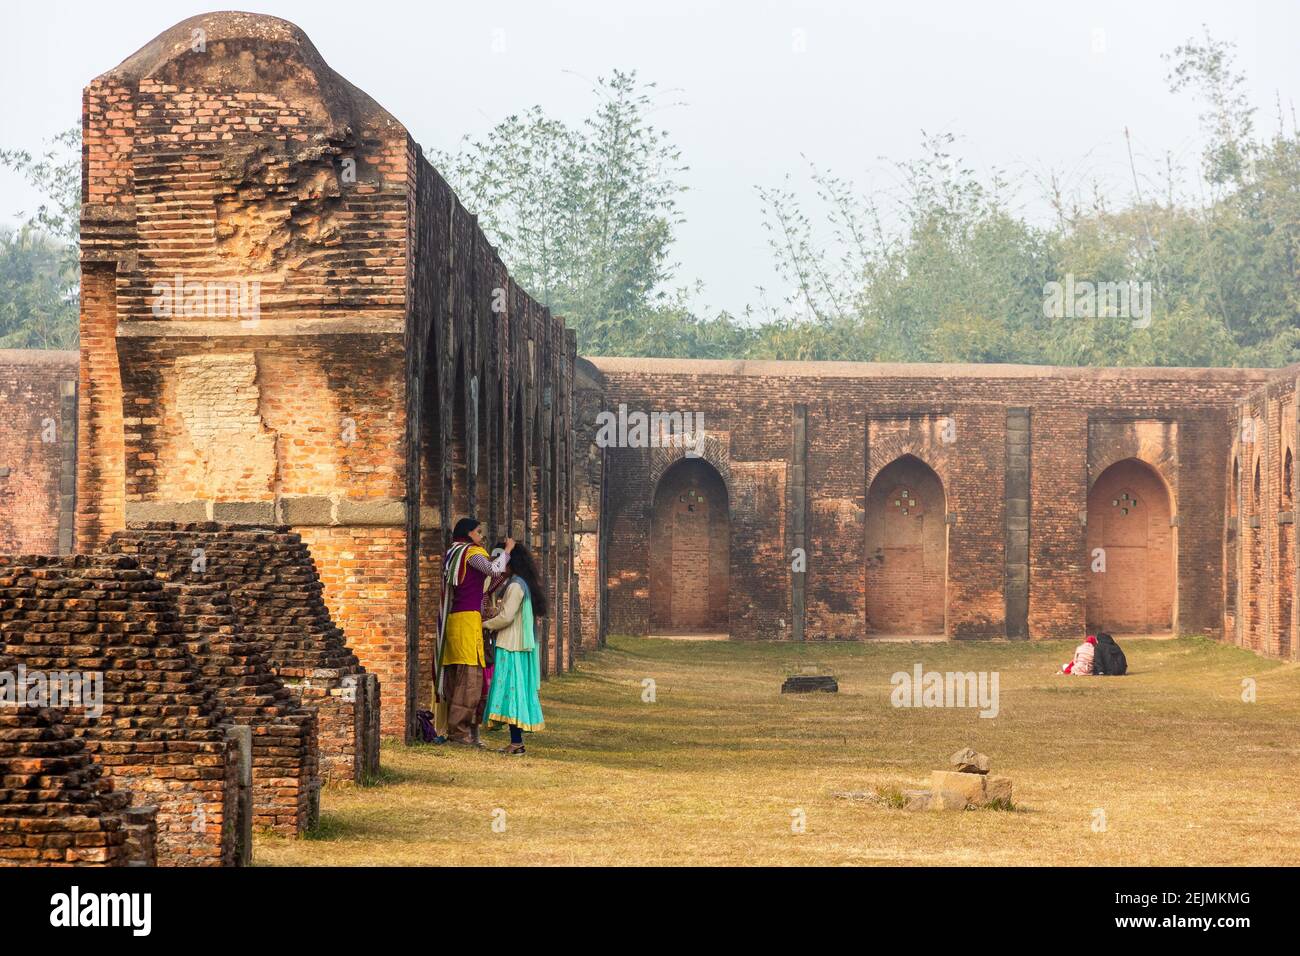 Malda, West Bengal,  India - January 2018: The misty ruins of the ancient Adina Masjid mosque in the village of Pandua. Stock Photo